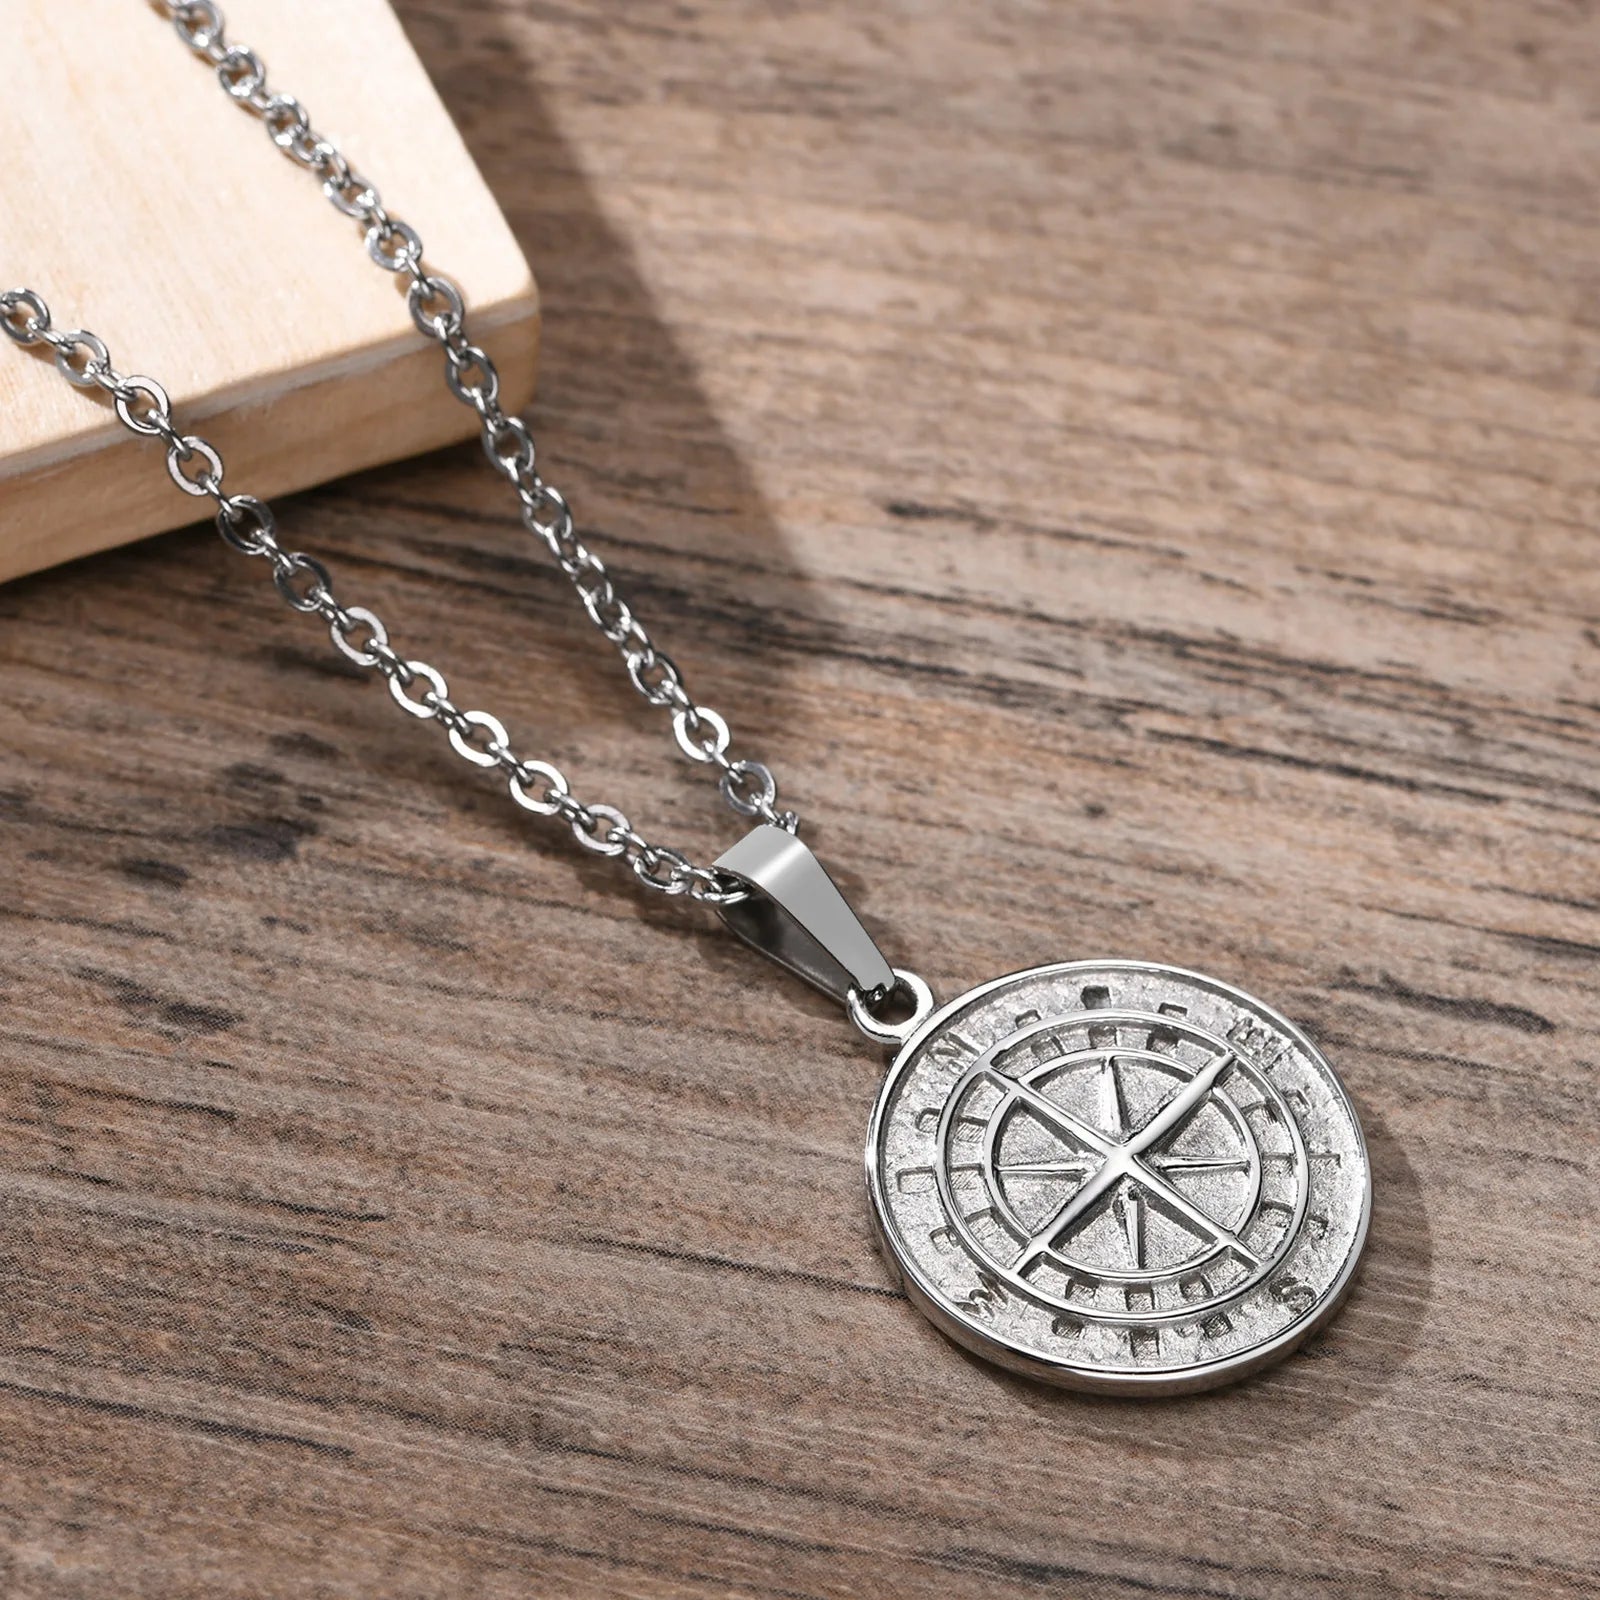 Stainless Steel Nautical Compass Pendant Necklaces - Madeinsea©